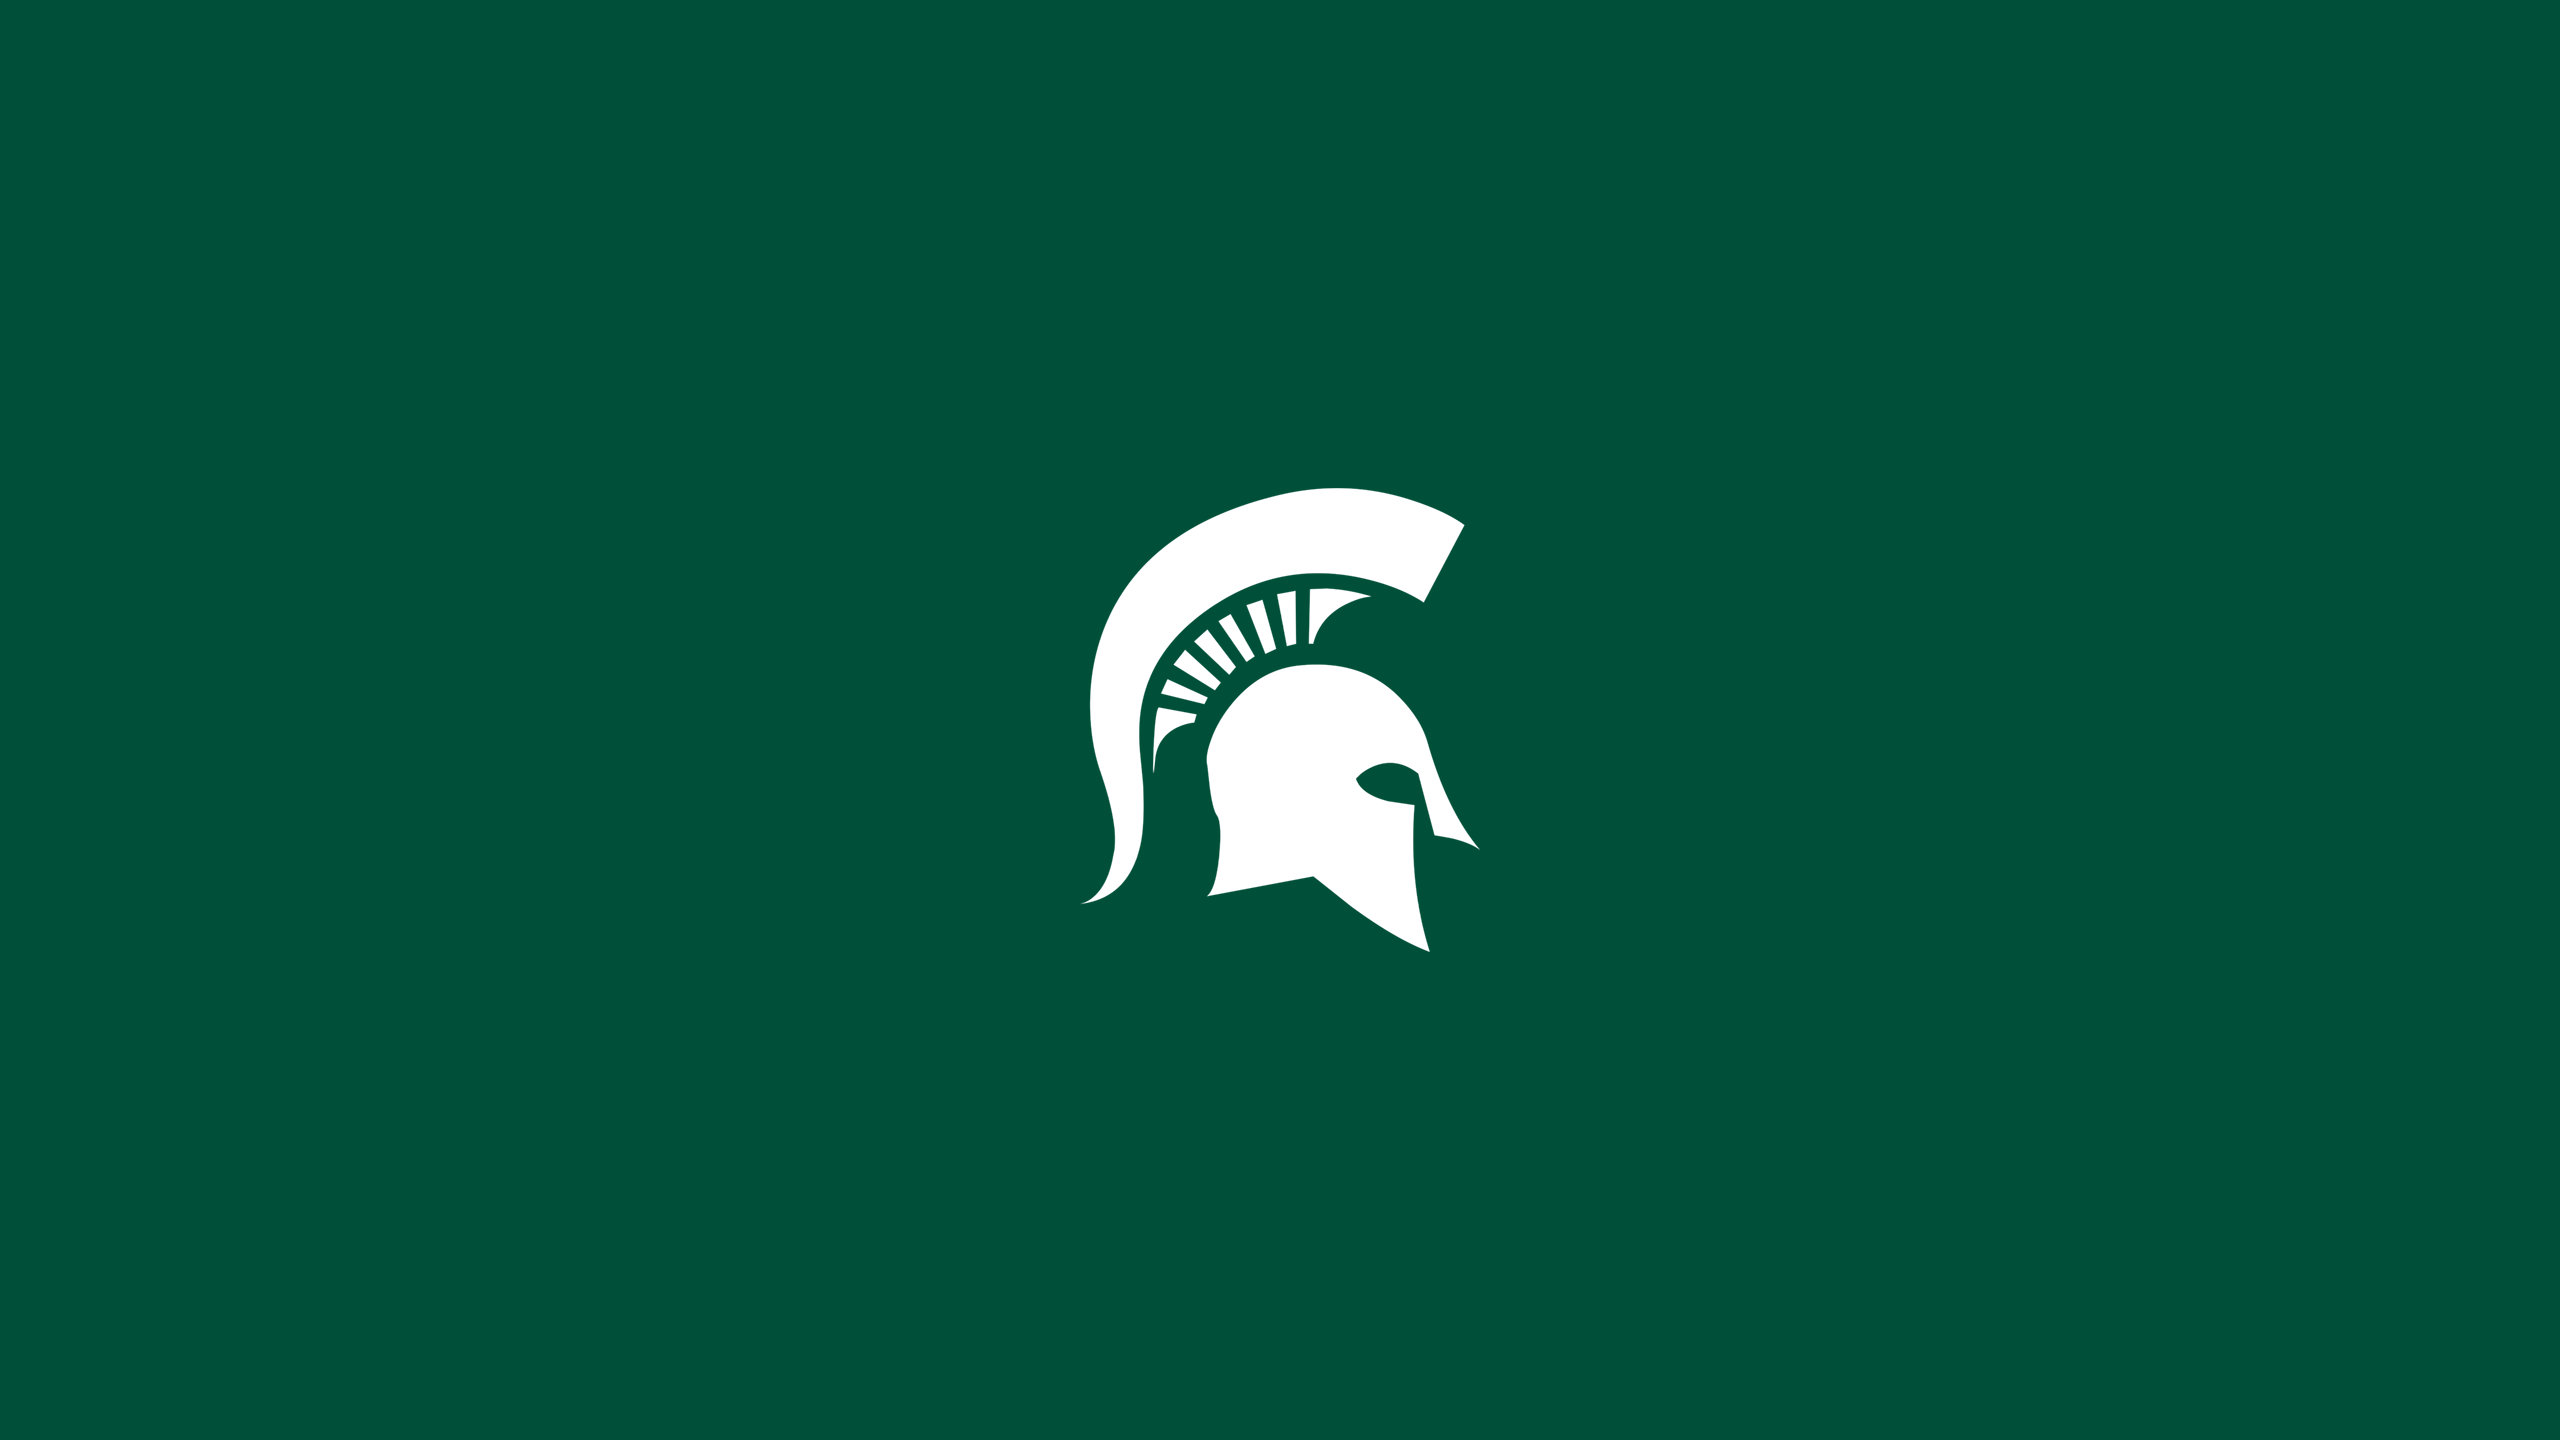 Michigan State Spartans Football - NCAAF - Square Bettor